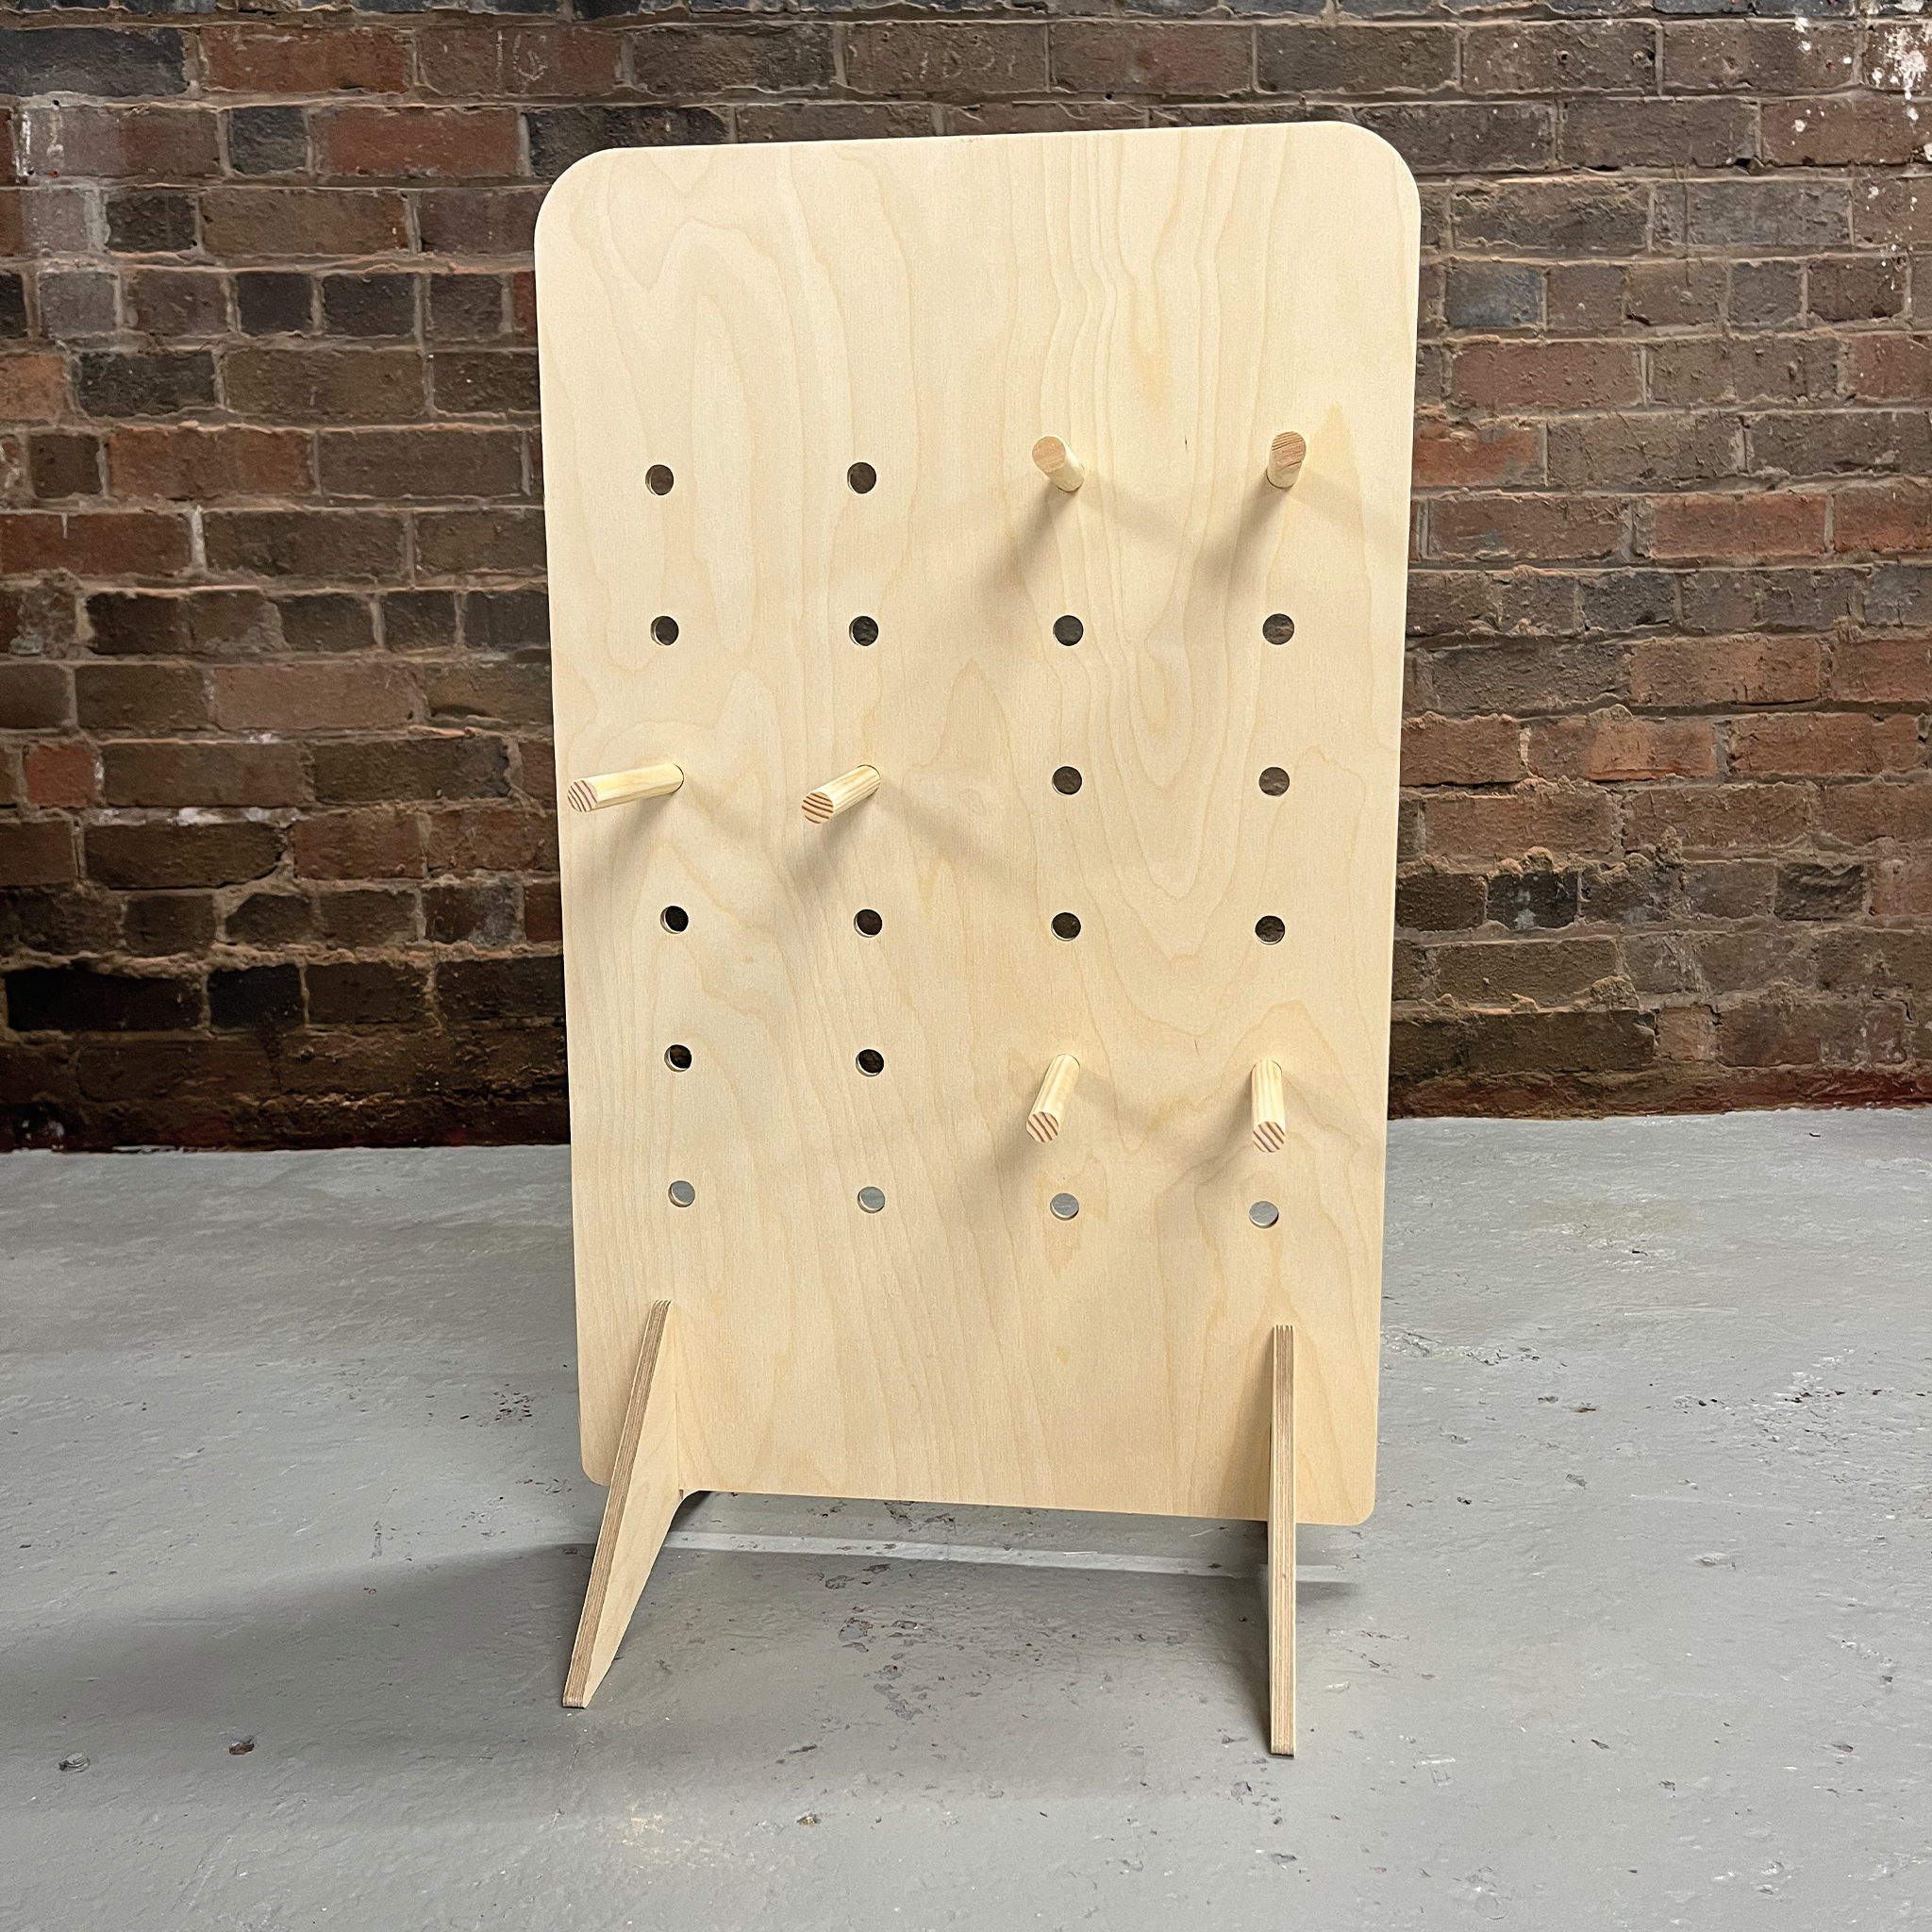 Tabletop Pegboard - Square